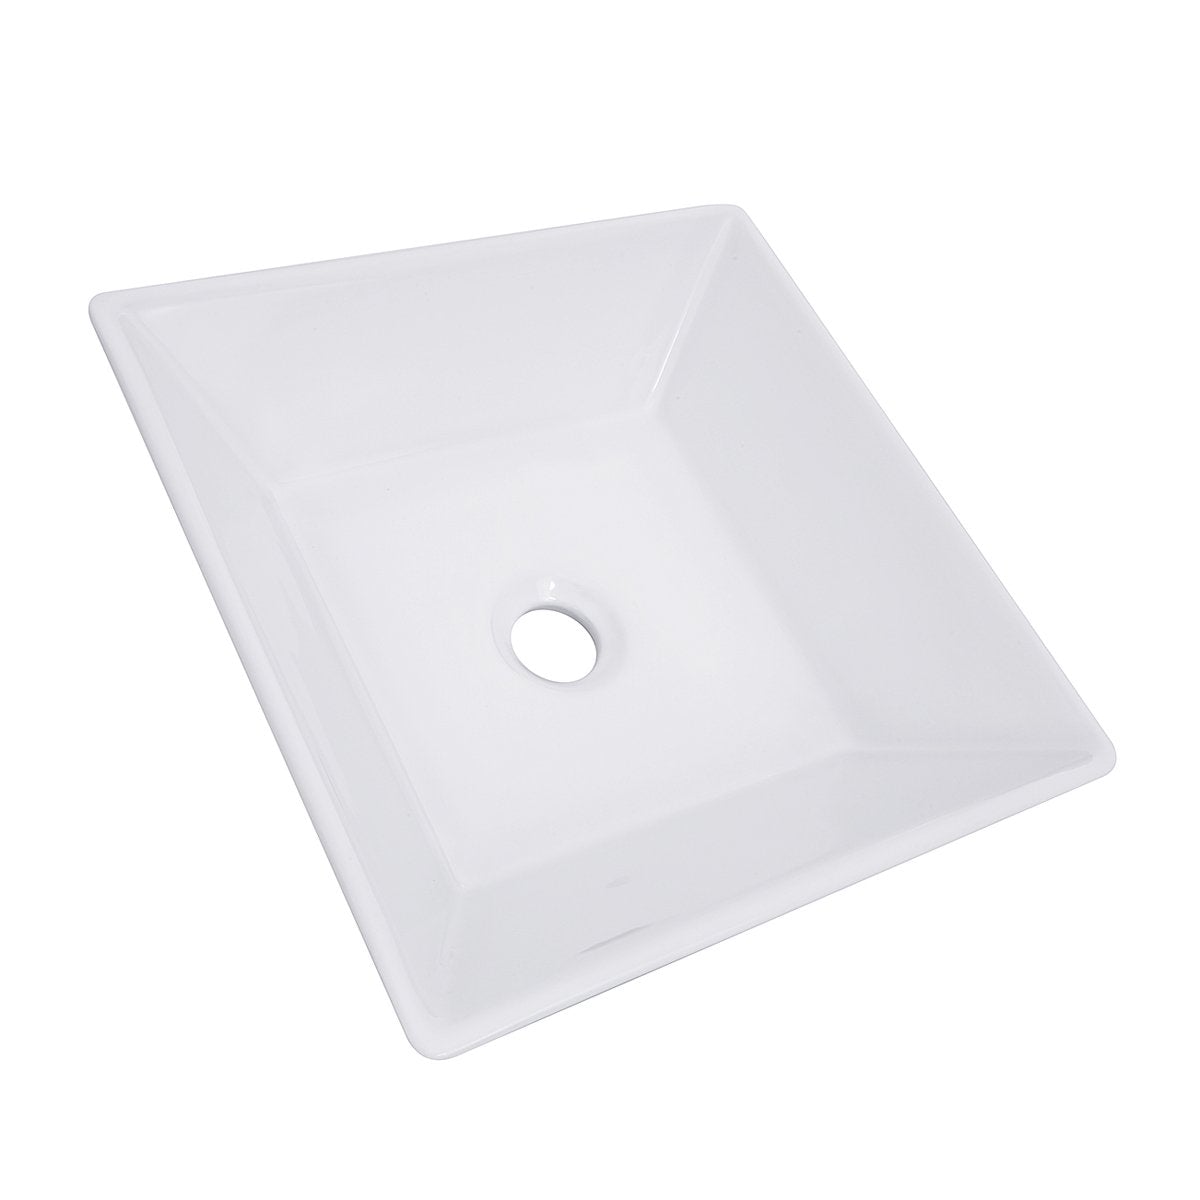 Nantucket Square Tapered White Vessel Sink - NSV109